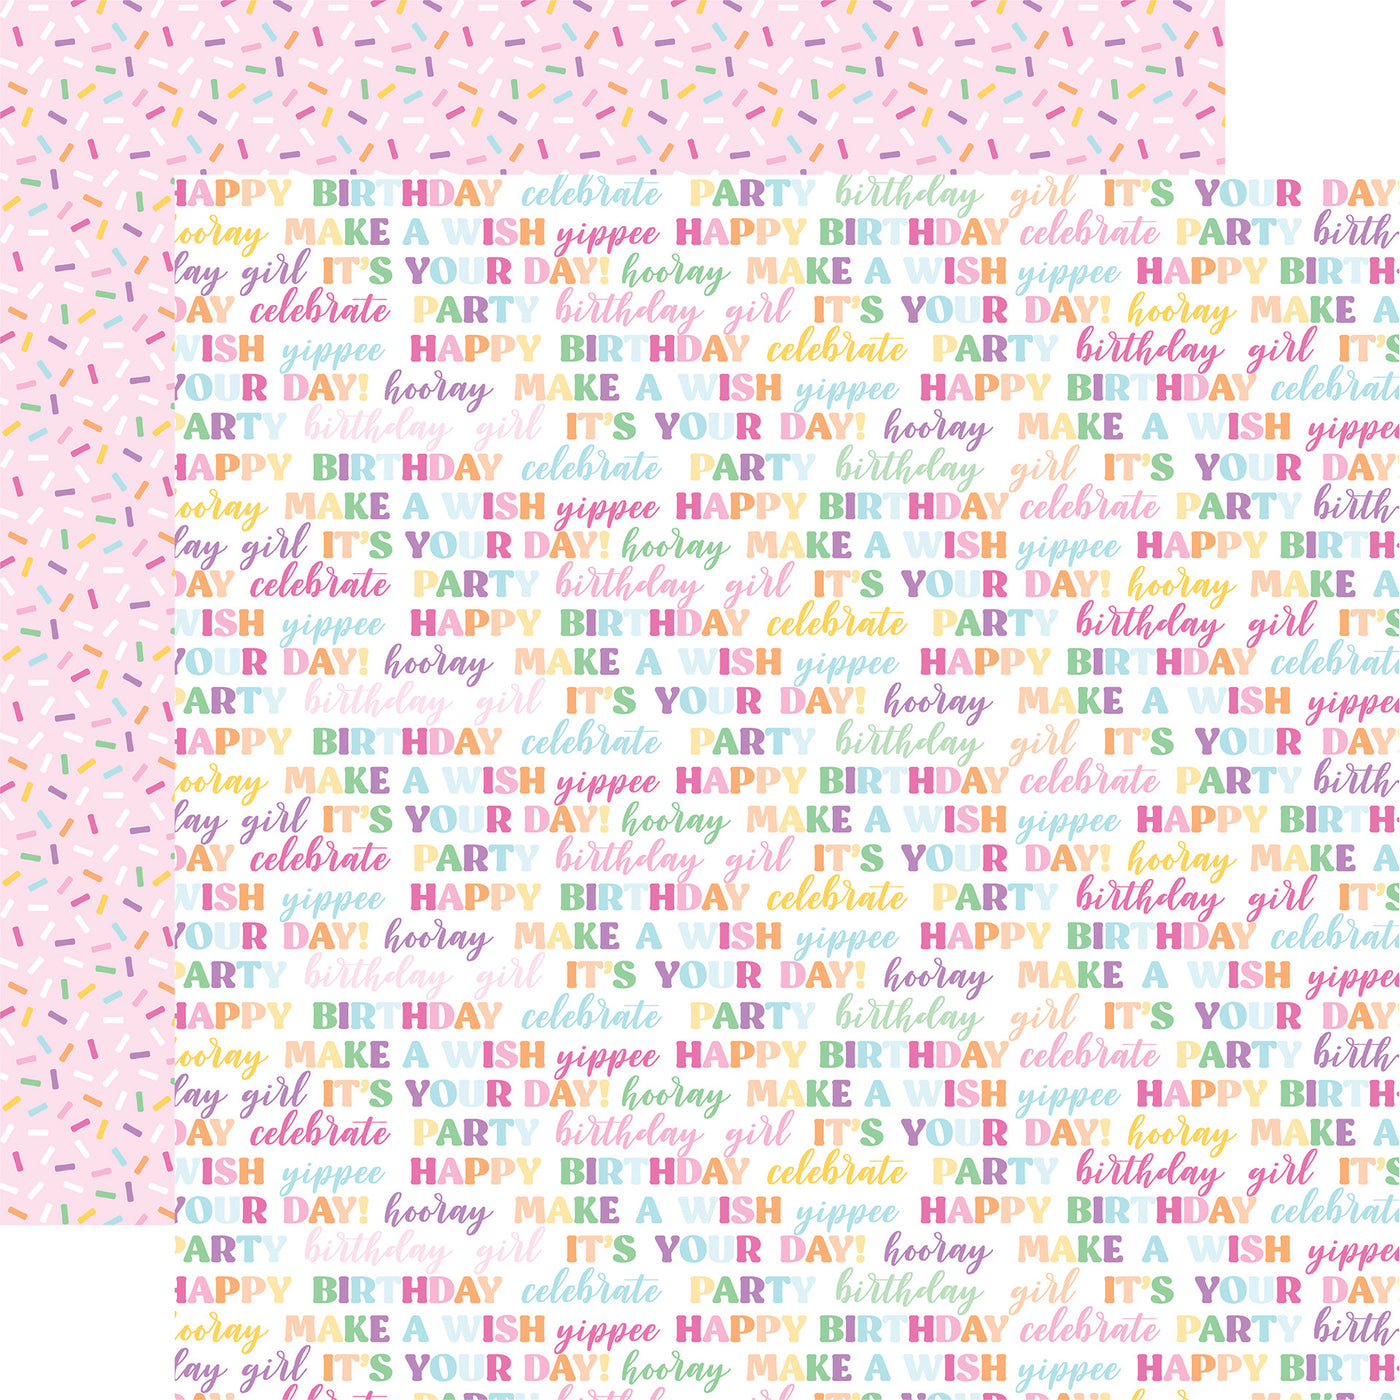 12x12 double-sided multi-colored patterned paper - (colorful pastel birthday words on a white background, birthday sprinkles on a pink background reverse) - from Echo Park Paper.